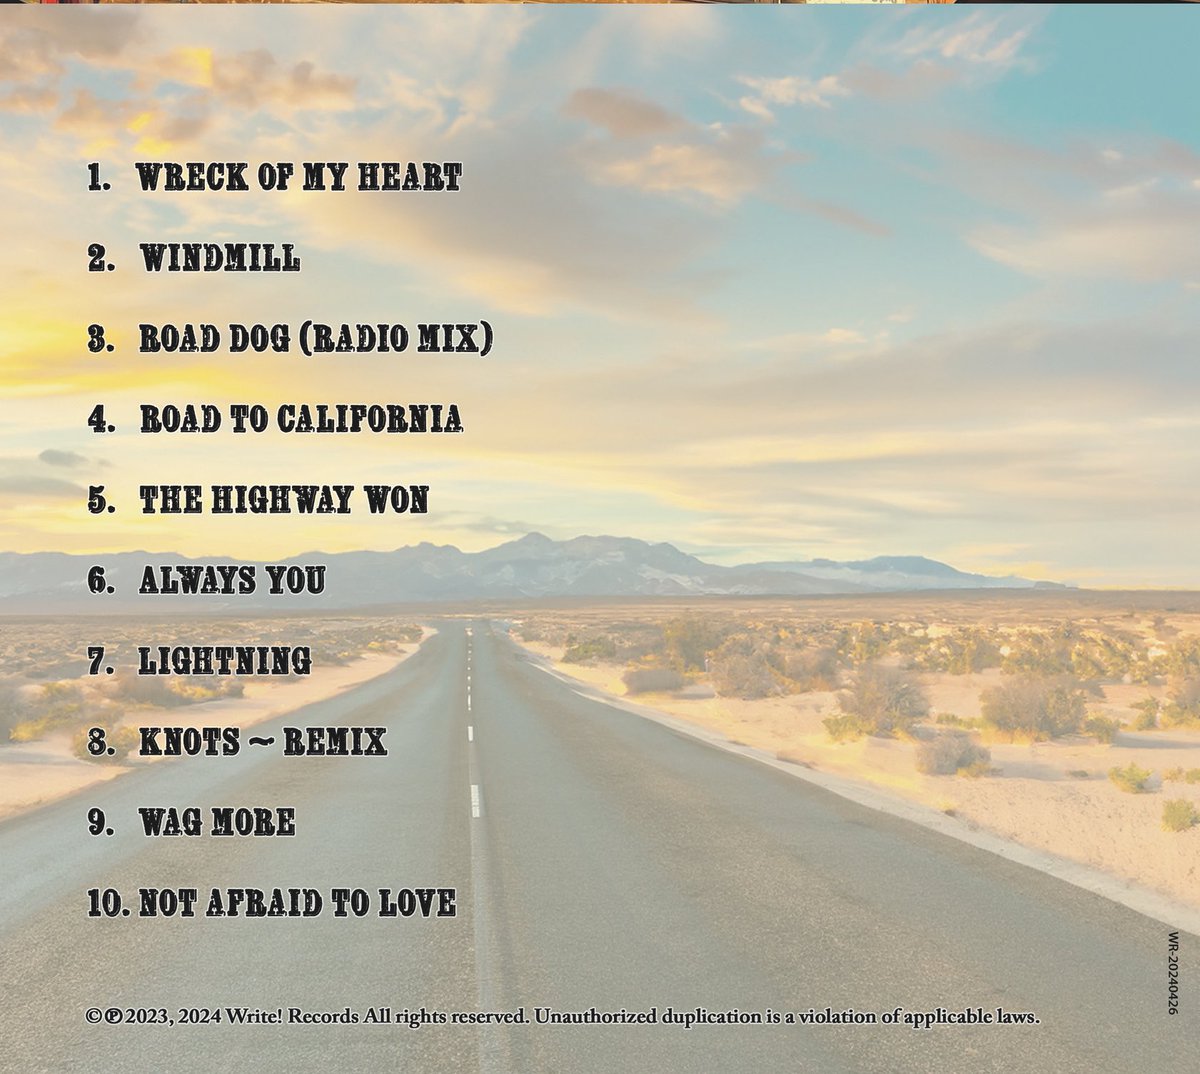 Now that you’ve had a couple of days to ride down the #RoadToCalifornia, comment your favorite track on the album! 🙌🏻